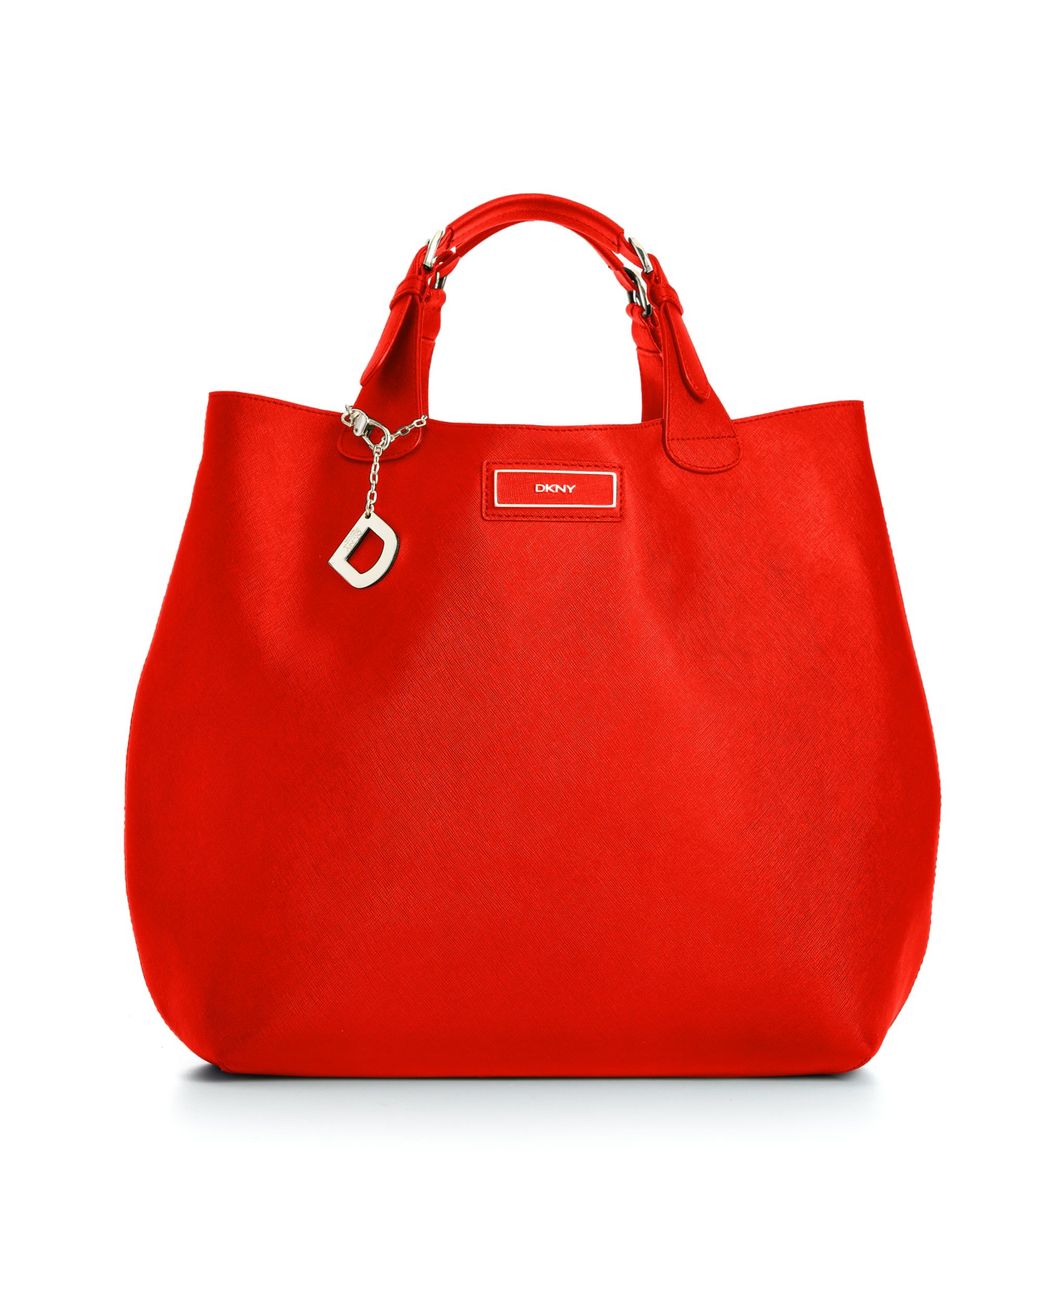 DKNY Dkny Handbag Saffiano Leather Large North South Tote in Red | Lyst